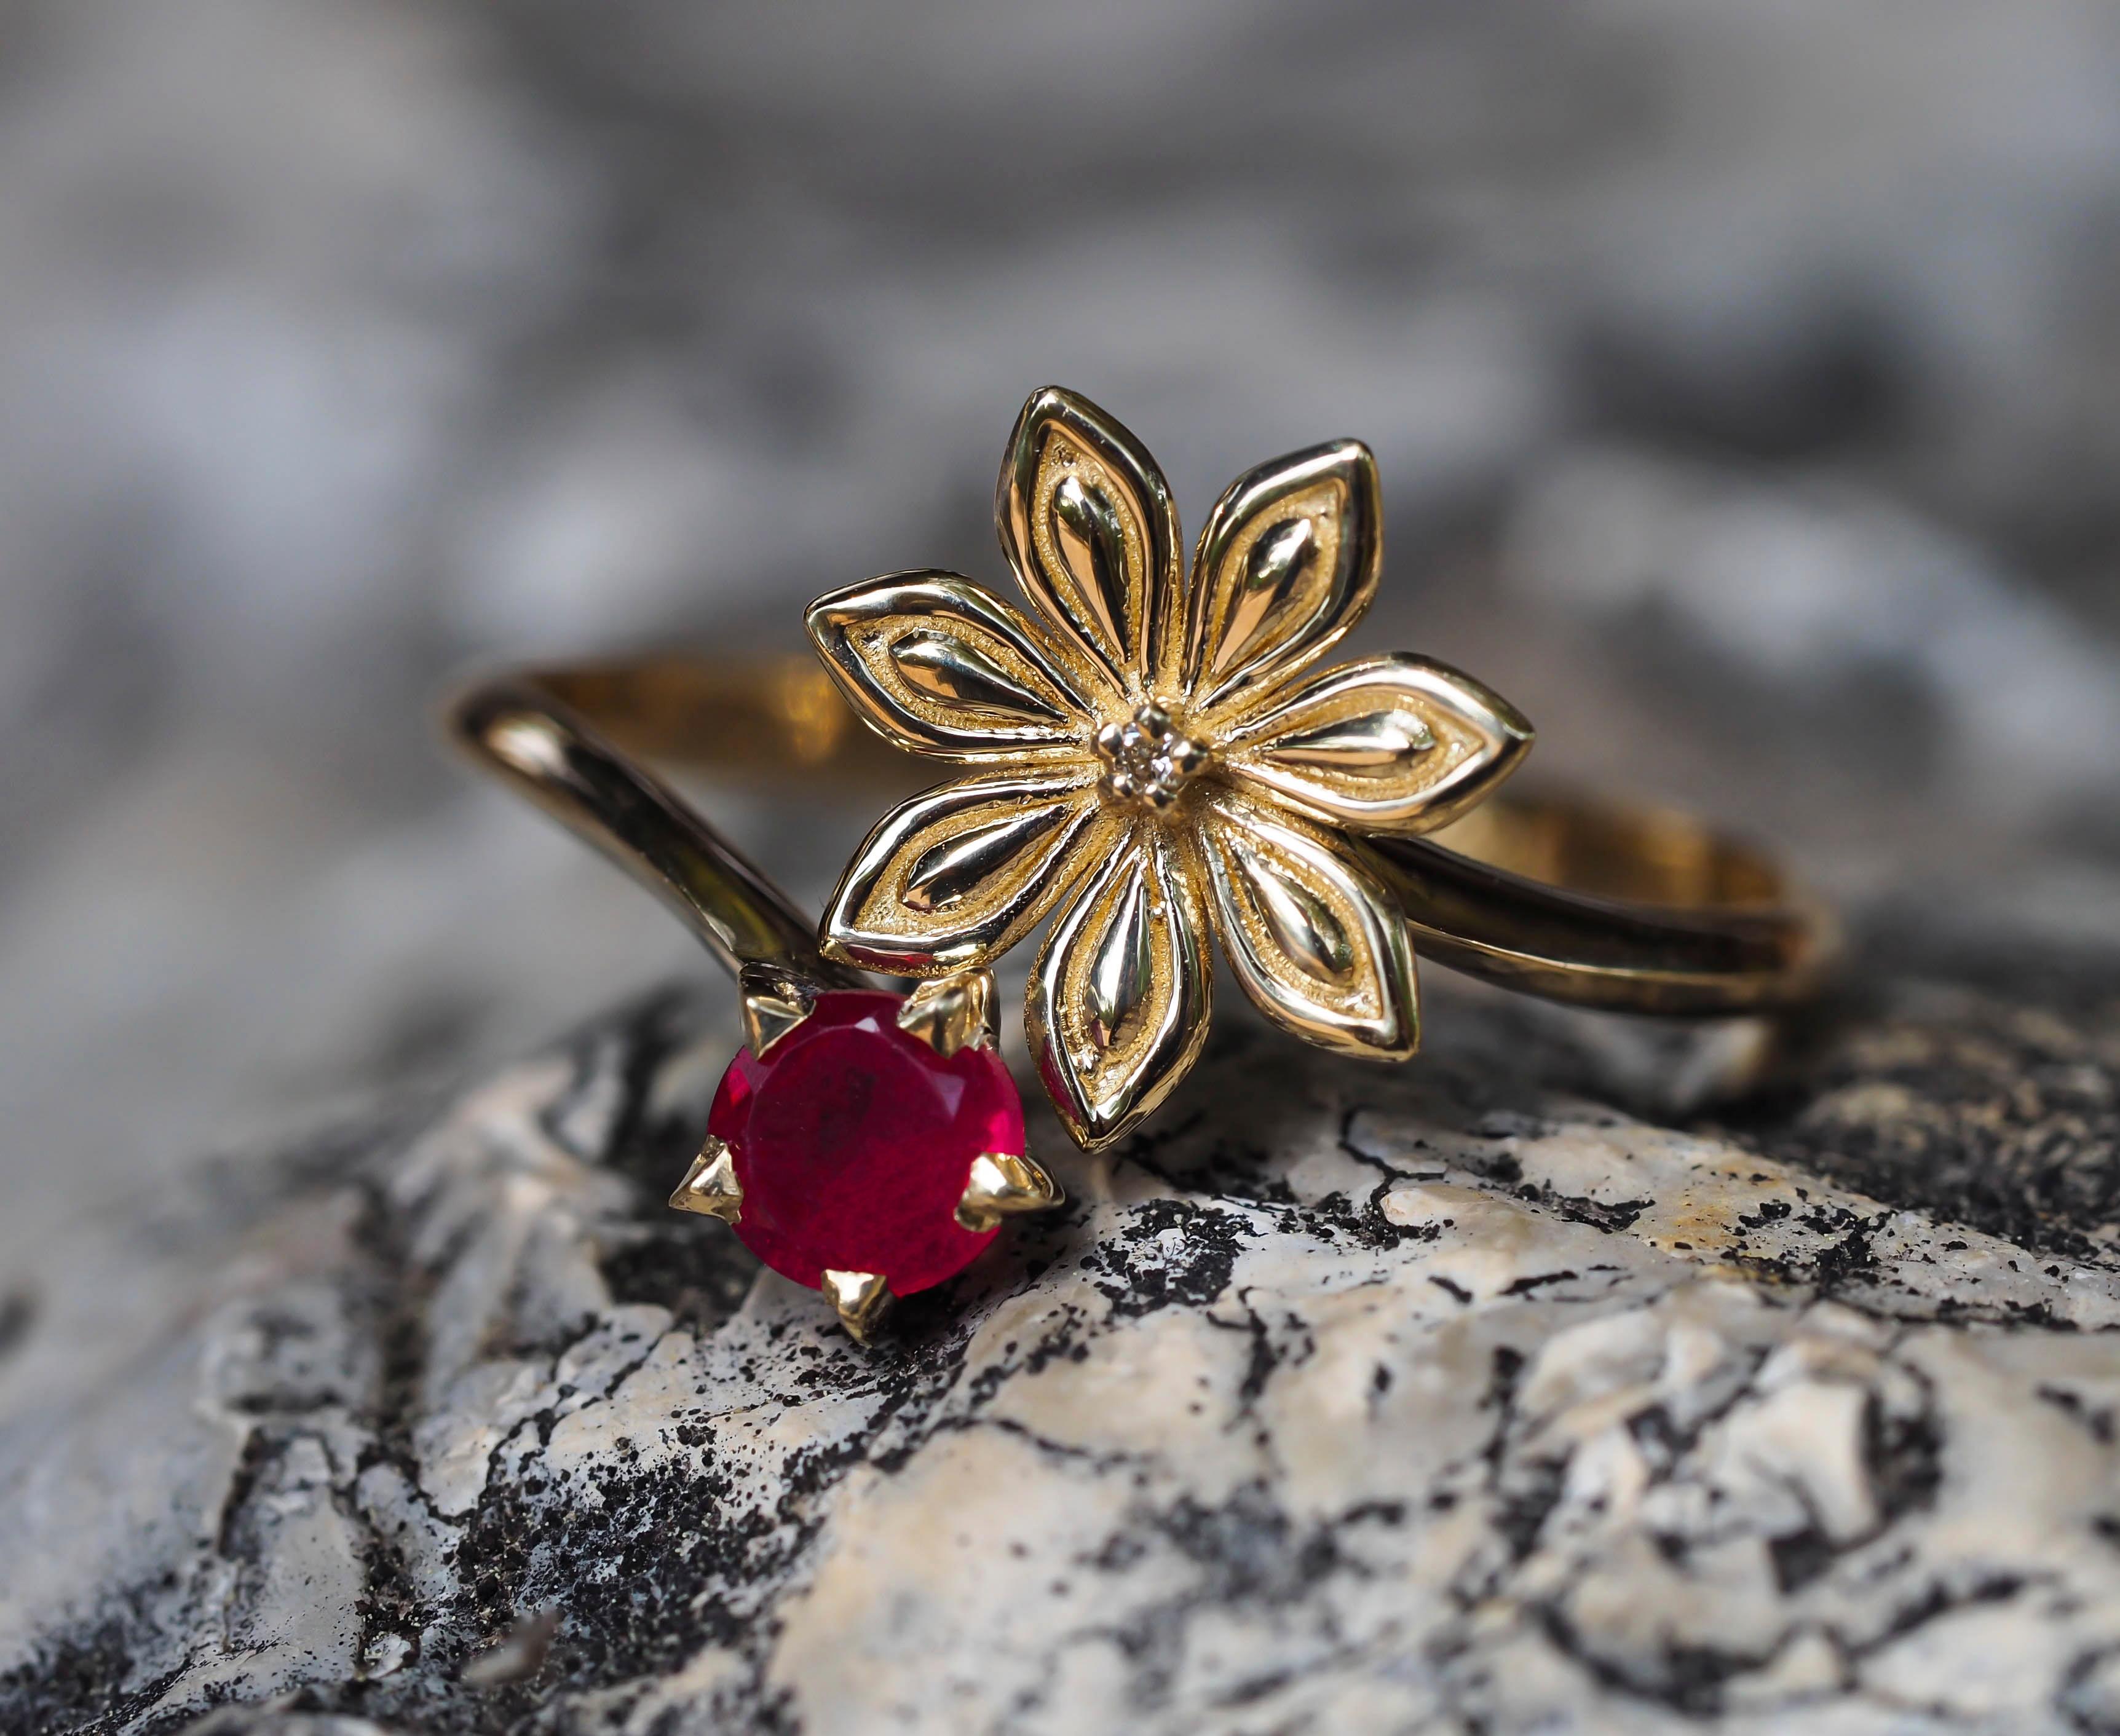 For Sale:   Ruby gold ring. 14 Karat Gold Star Anise Flower Ring. July birthstone ruby ring 2